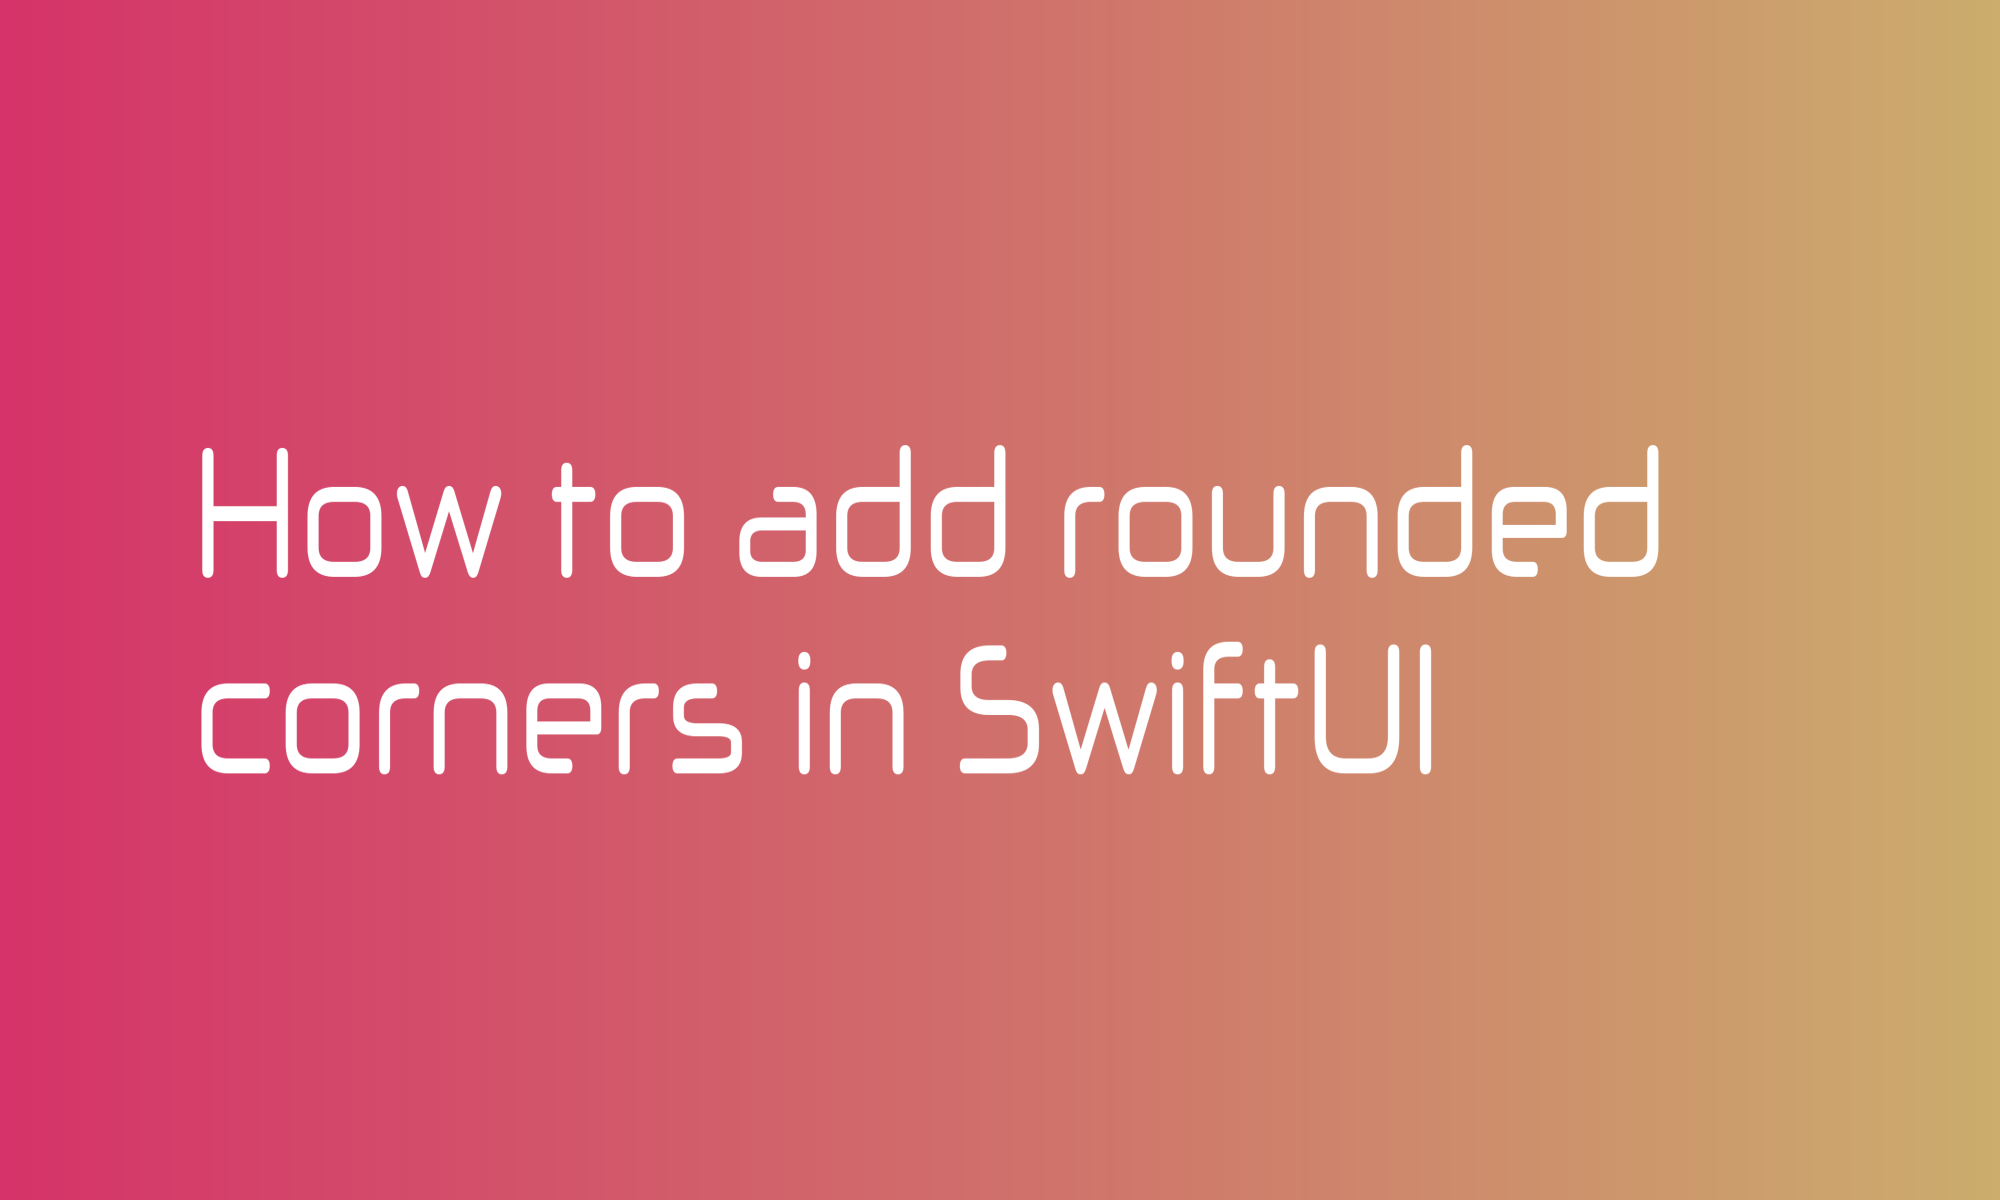 How to add rounded corners in SwiftUI